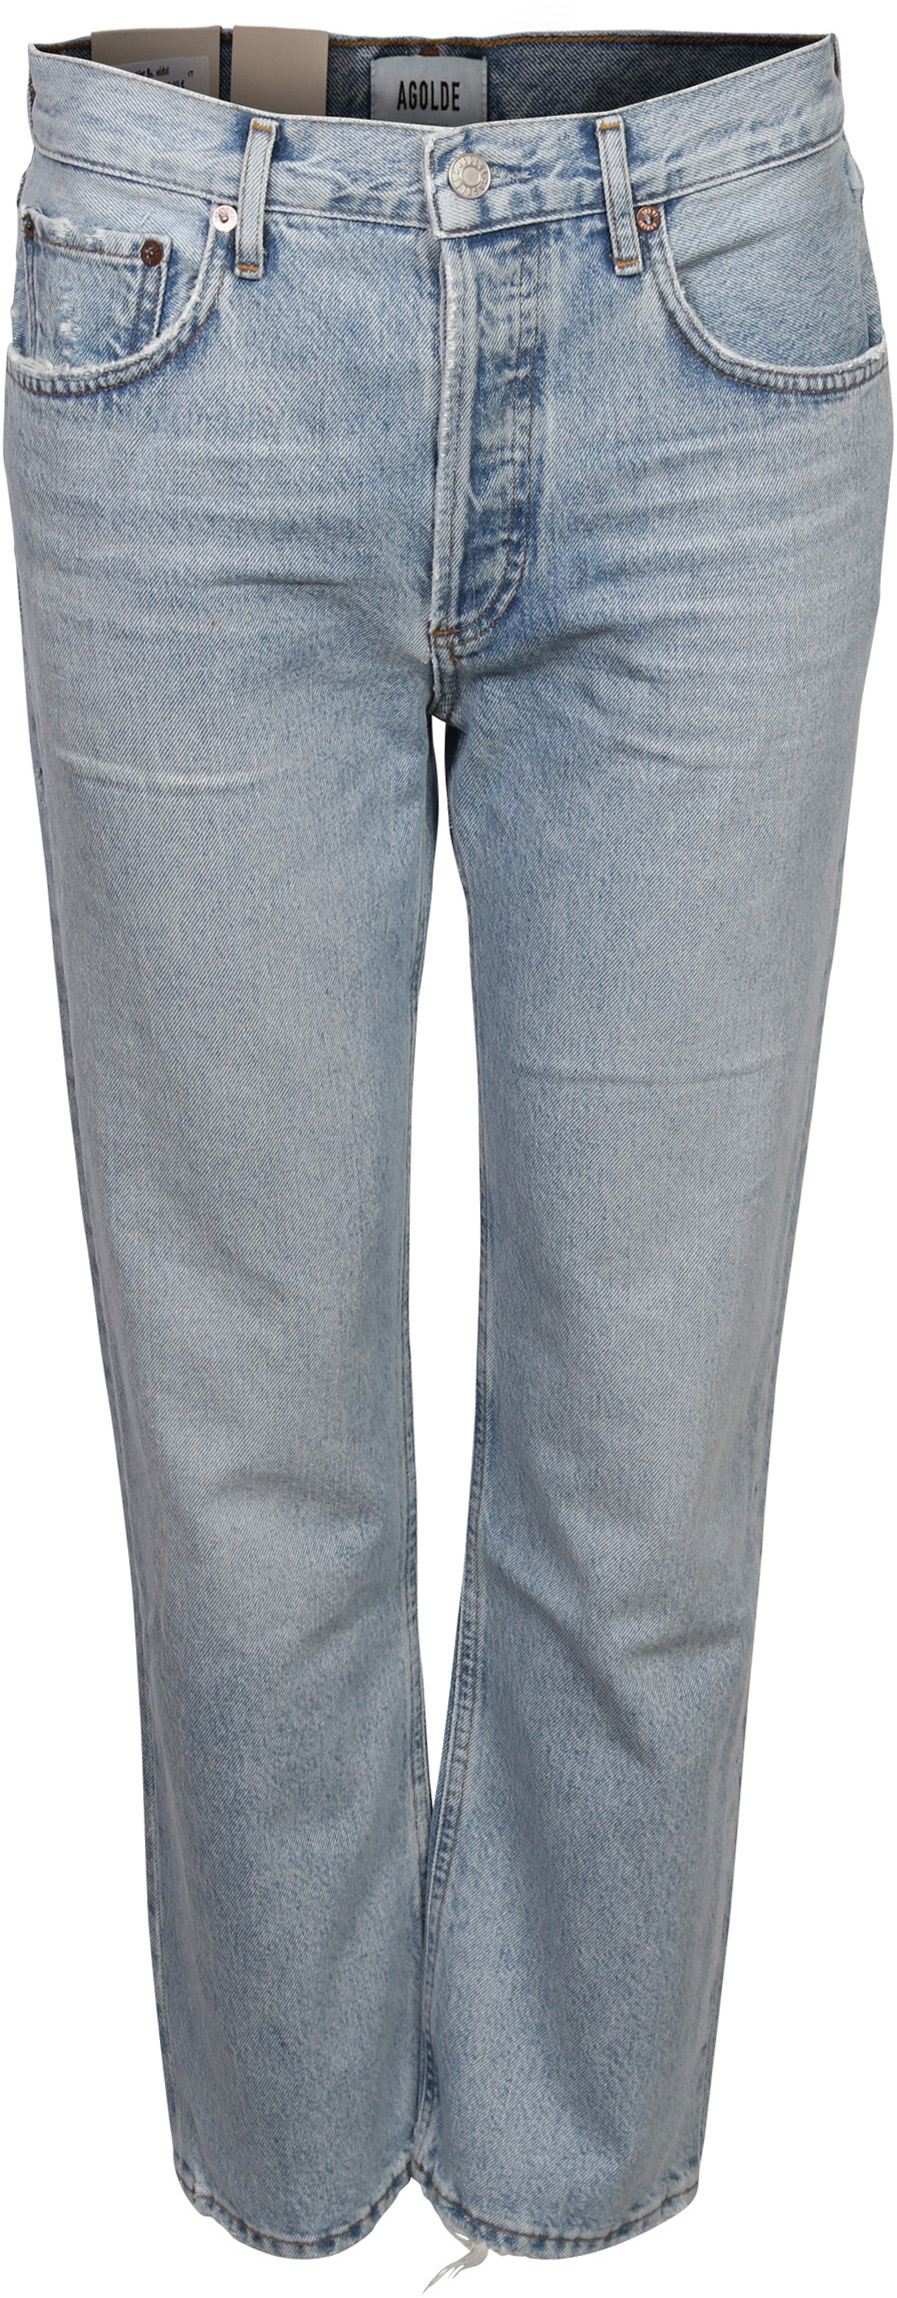 Agolde Jeans Ripley Light Blue Washed